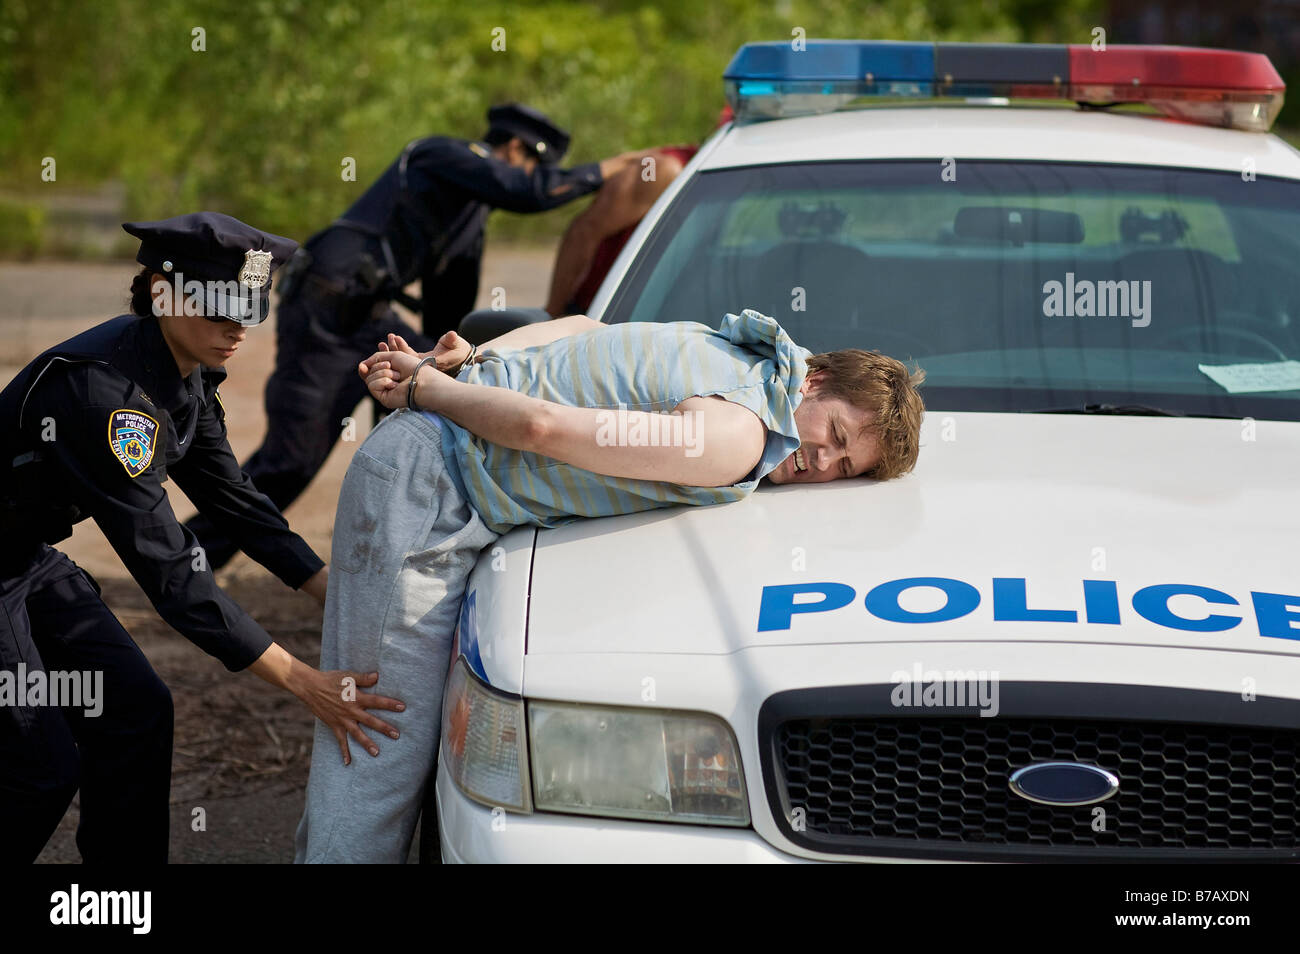 Police Officers Arresting Suspects Stock Photo